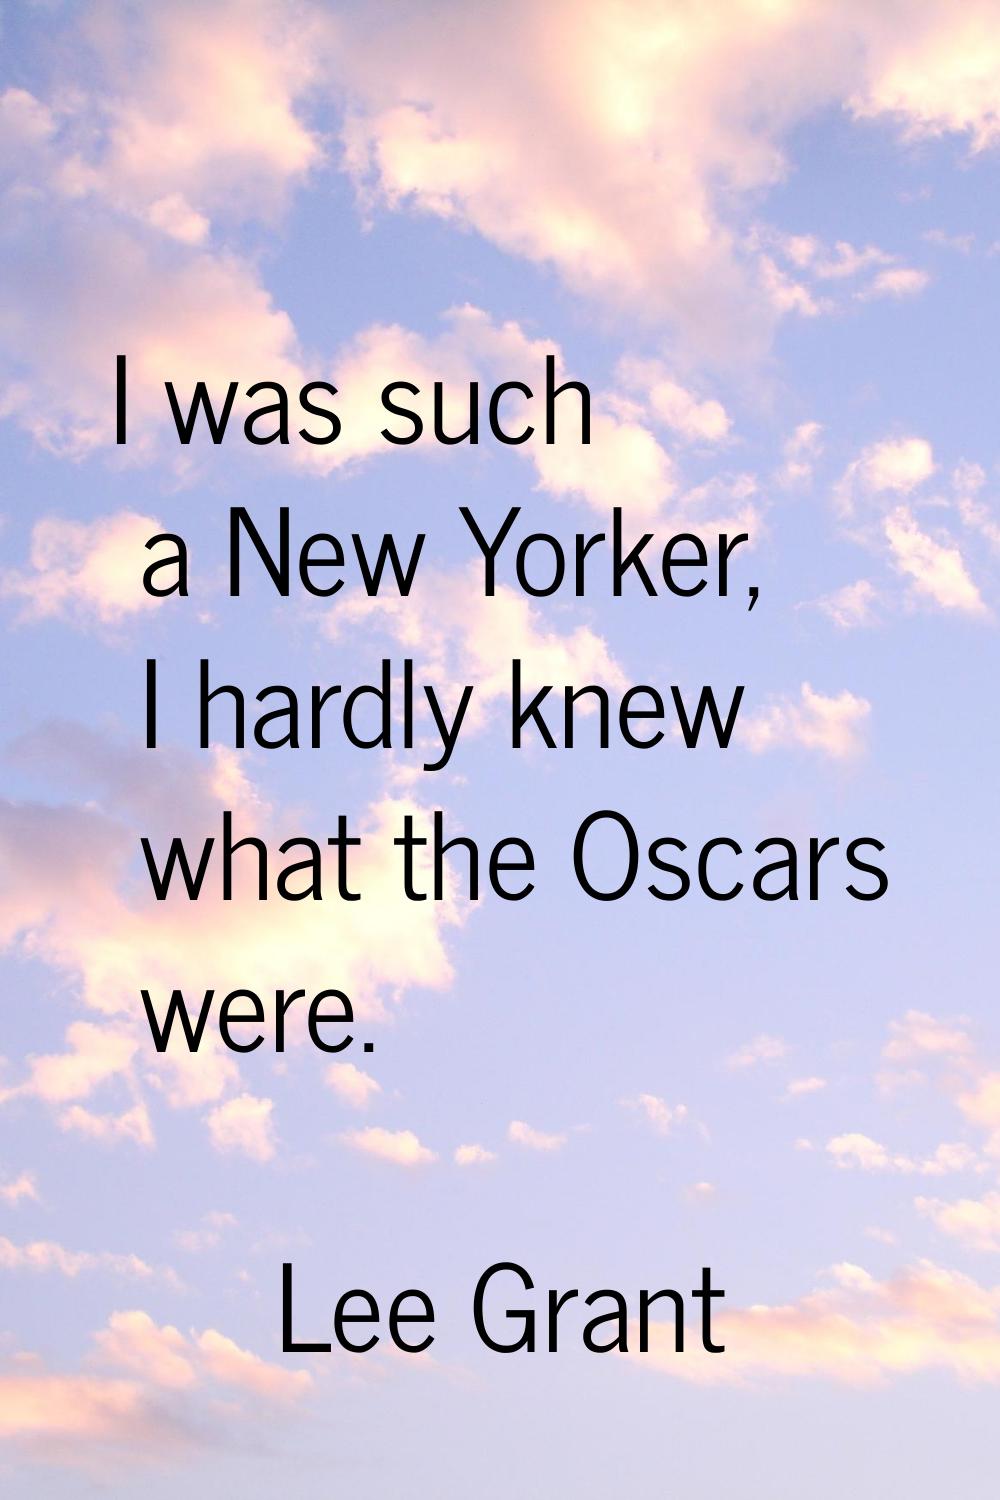 I was such a New Yorker, I hardly knew what the Oscars were.